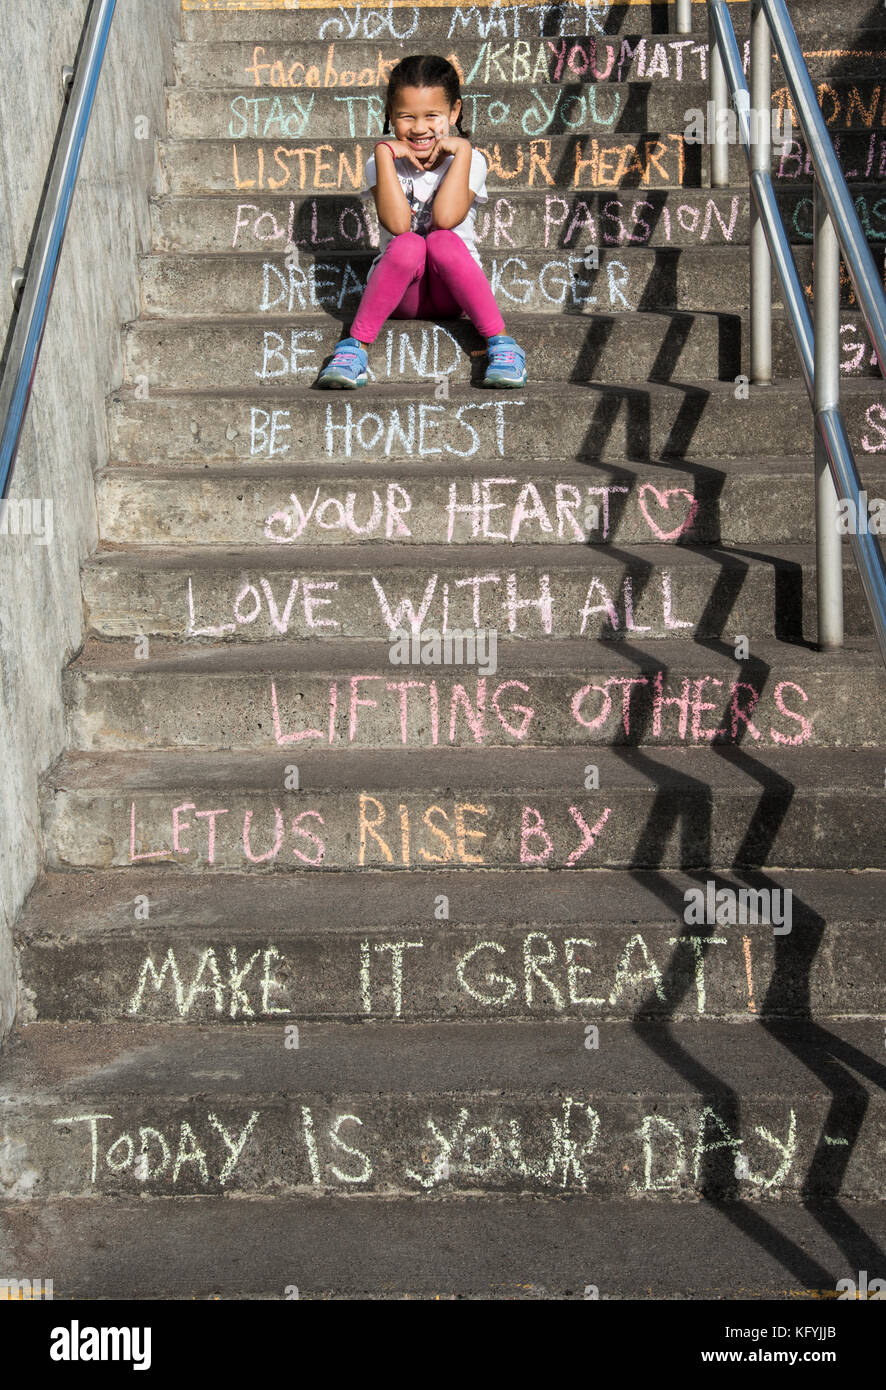 Duluth, Minnesota. Five year old bi-racial girl sitting on the stairs of inspiration. Stock Photo